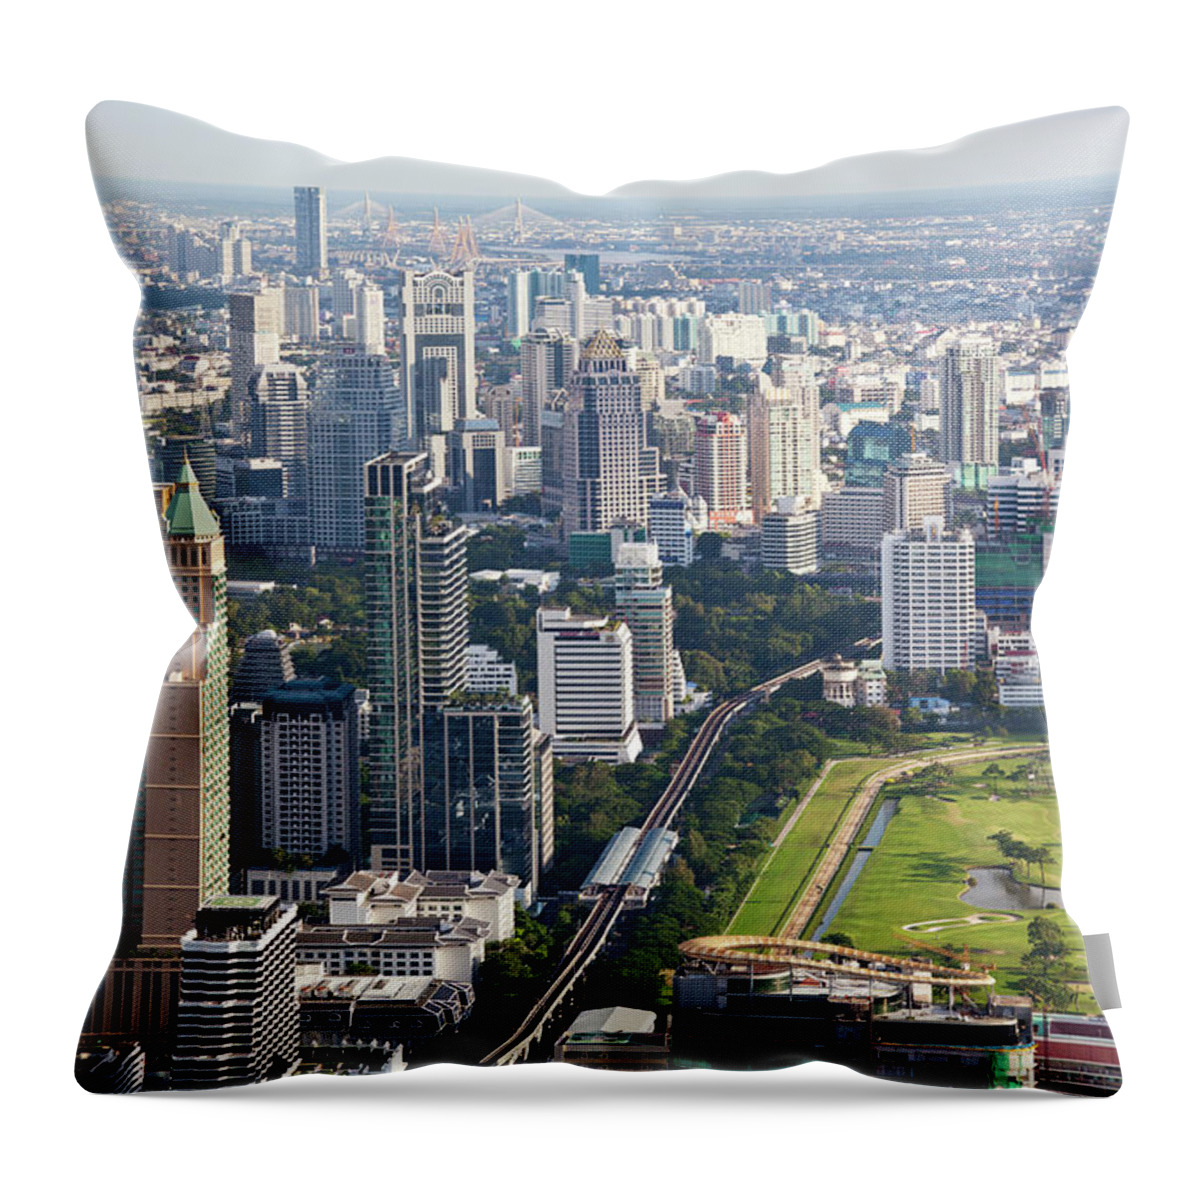 Population Explosion Throw Pillow featuring the photograph The Skyscrapers Of Bangkok by Tom Bonaventure